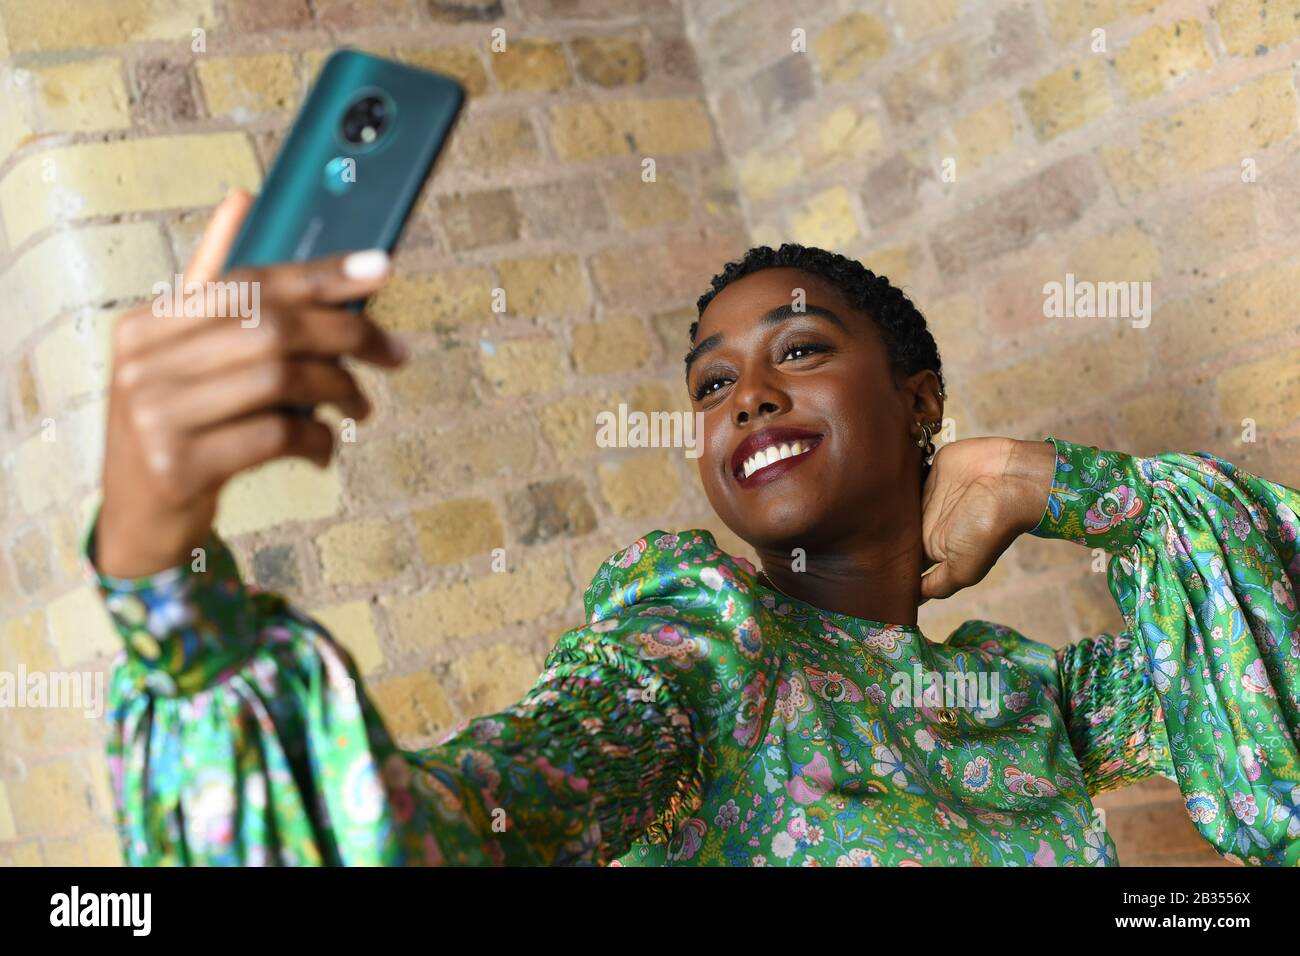 EMBARGOED TO 0001 THURSDAY MARCH 5 EDITORIAL USE ONLY Actress Lashana Lynch who plays Agent Nomi in the upcoming James Bond No Time To Die film, helps HMD Global, the home of Nokia phones unveil their largest ever global marketing campaign at the London Film Museum. Photo. Issue date: Thursday March 5, 2020. To celebrate the partnership, Lashana features in a new campaign for Nokia phones - The Only Gadget You Will Ever Need - which has been directed by BAFTA Award-winning director Amma Asante. Photo credit should read: Doug Peters/PA Wire Stock Photo